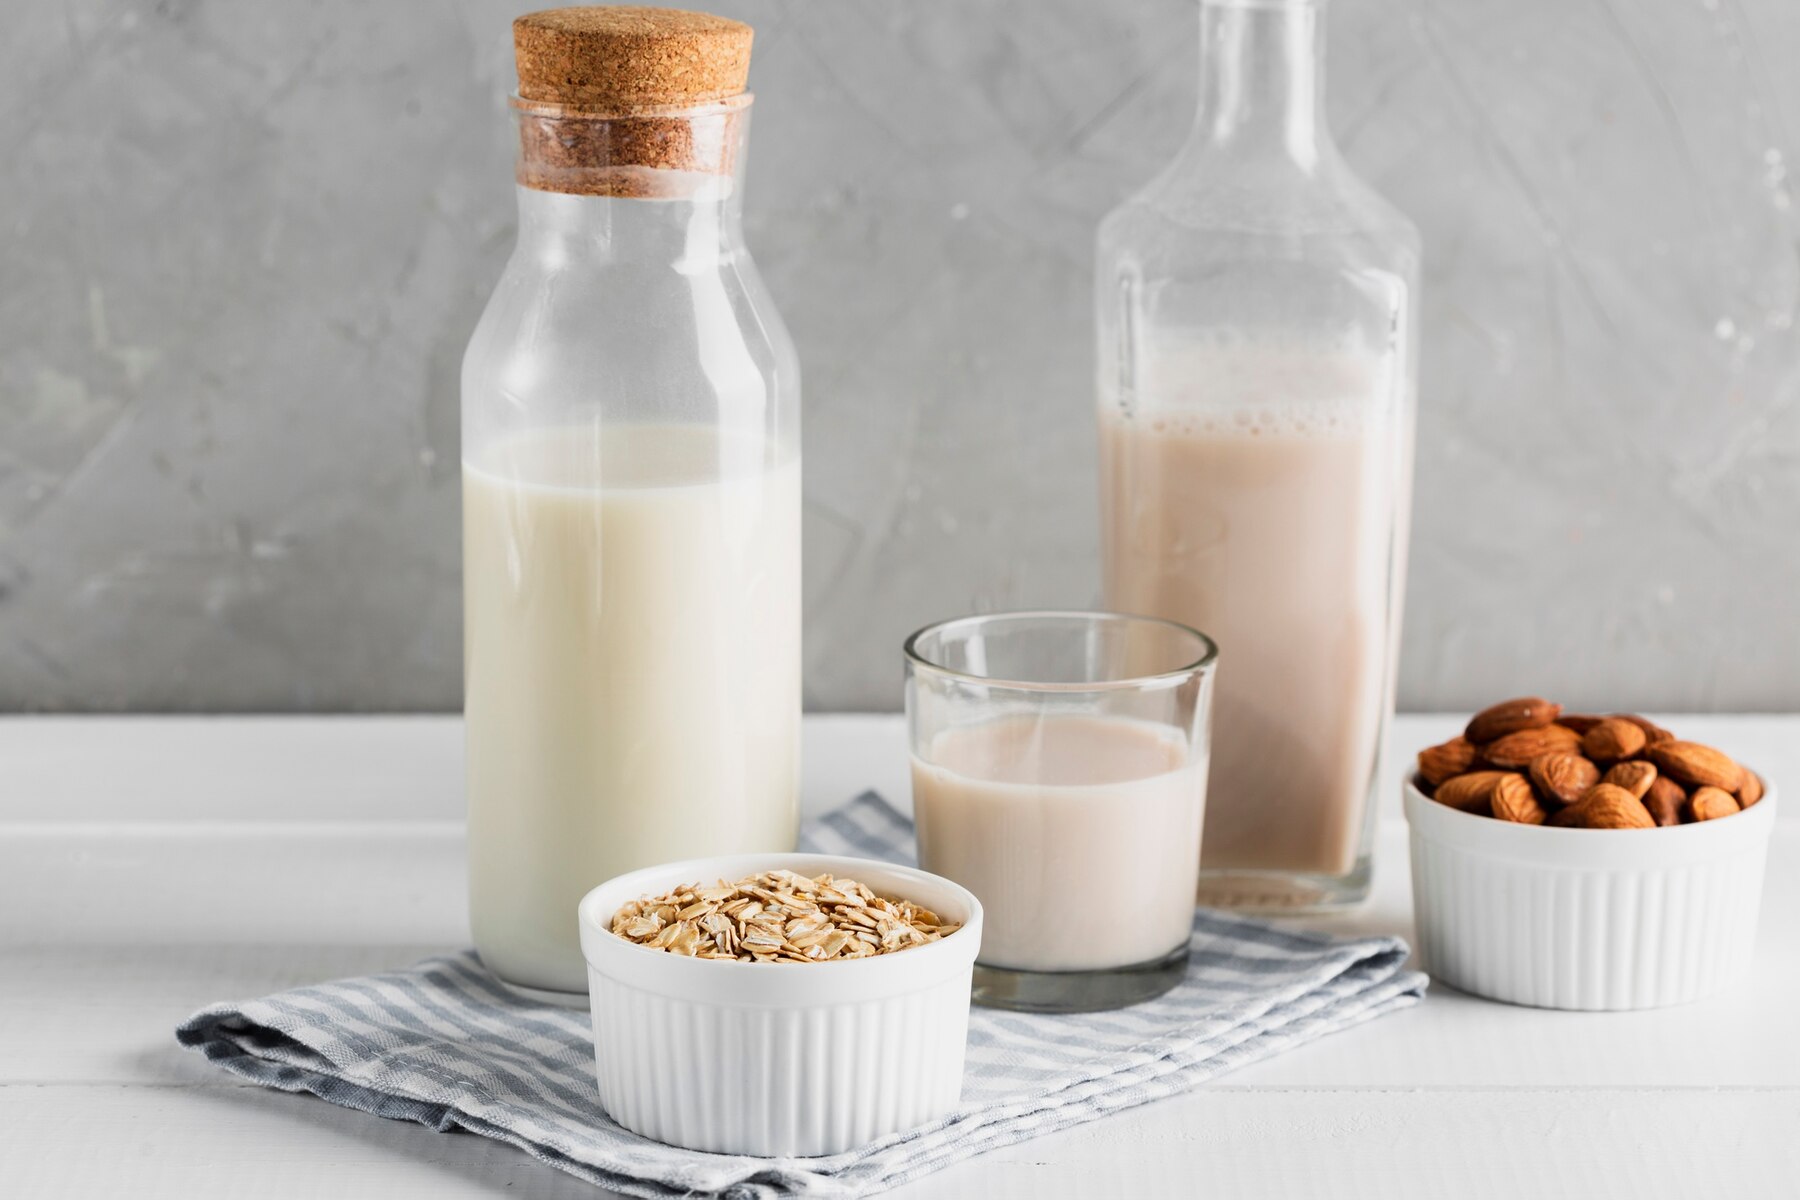 set-of-milk-bottles-and-glasses-with-oatmeal-and-almonds_23-2148356819 (1).jpg